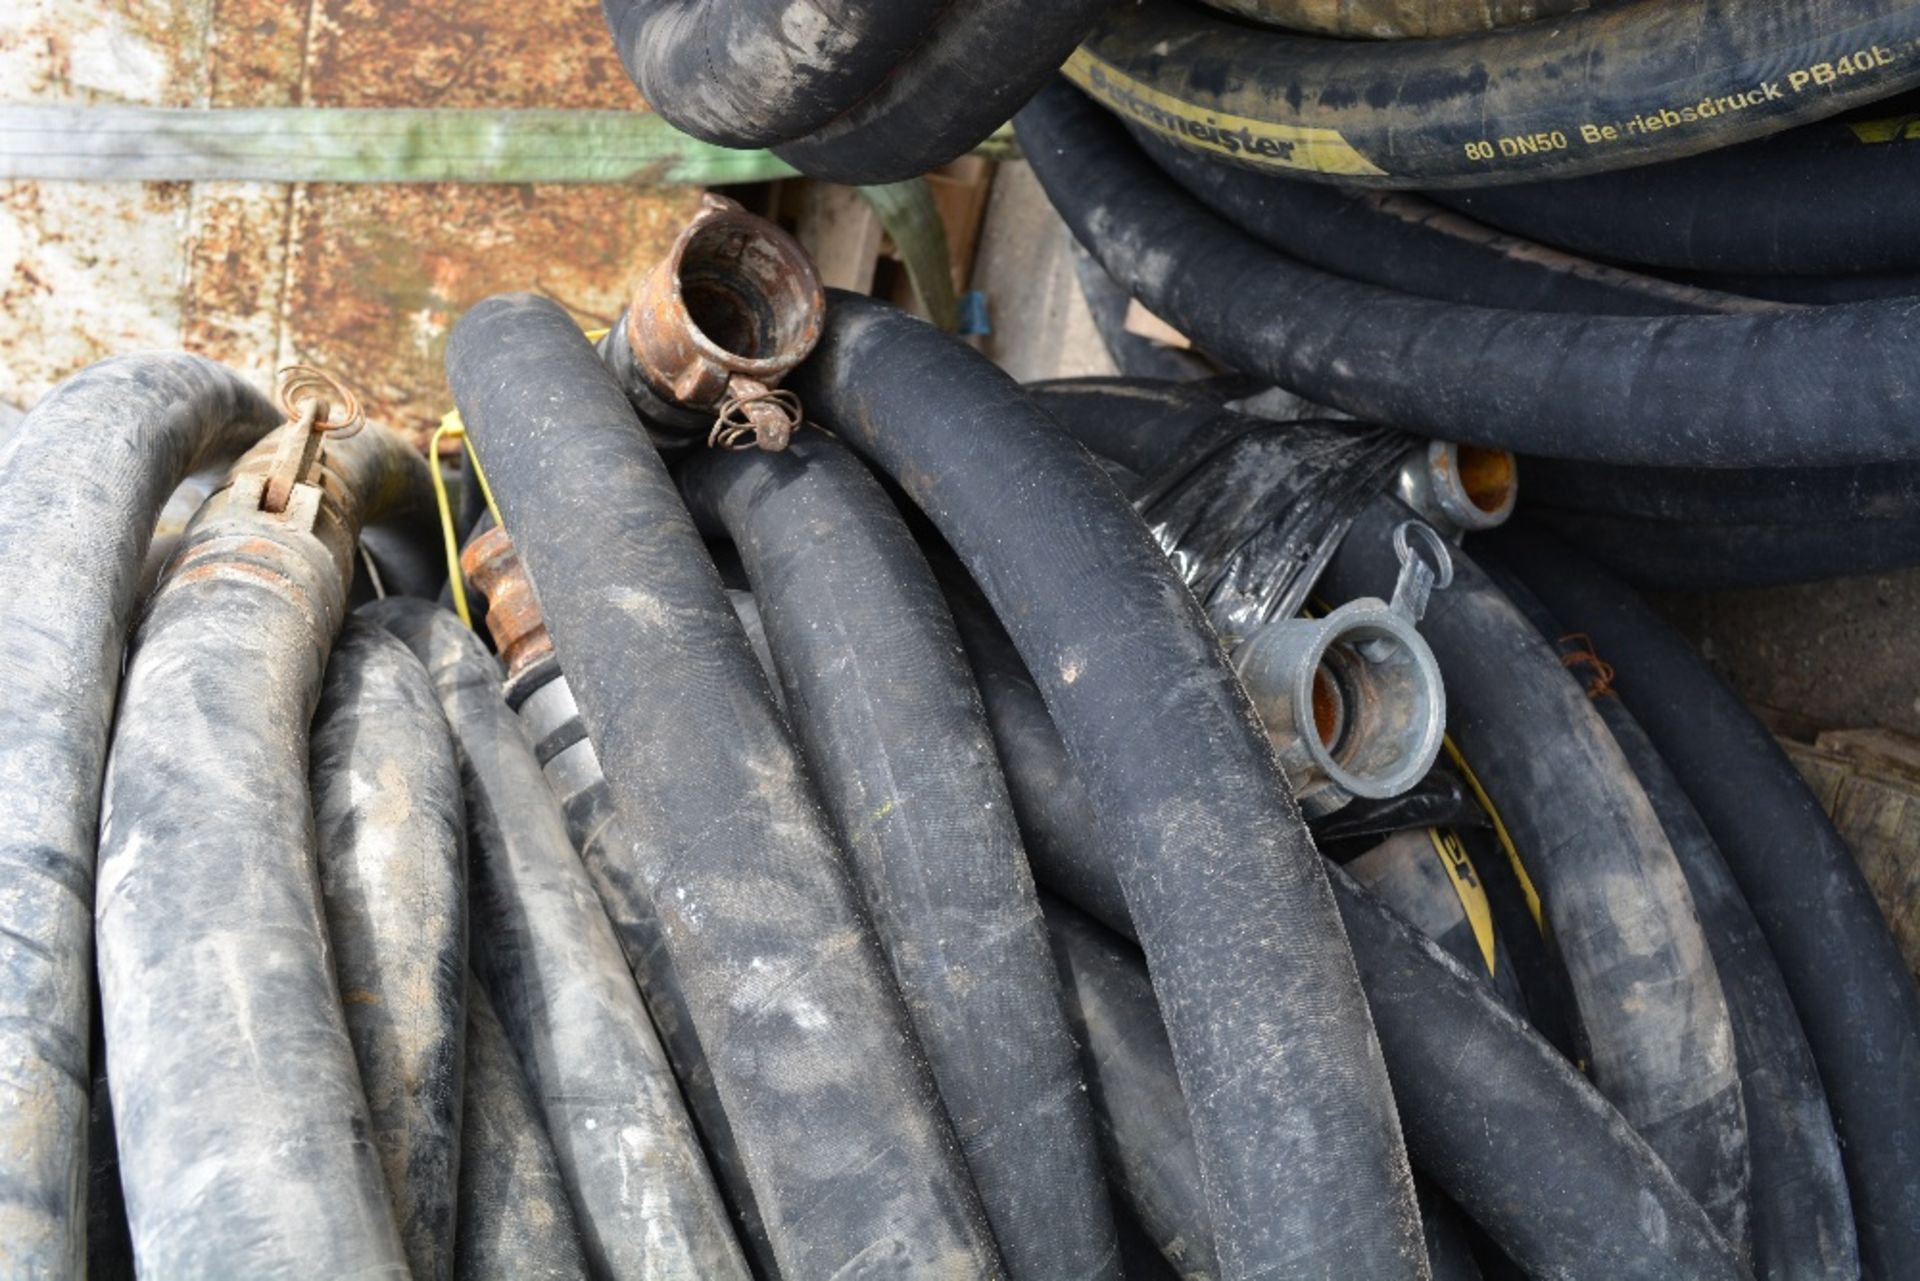 ASSORTED GROUT / SCREED PIPES (1 PALLET), ID: PL-15661, RUISLIP PLANT HIRE LTD. *UNRESERVED* - Image 5 of 5